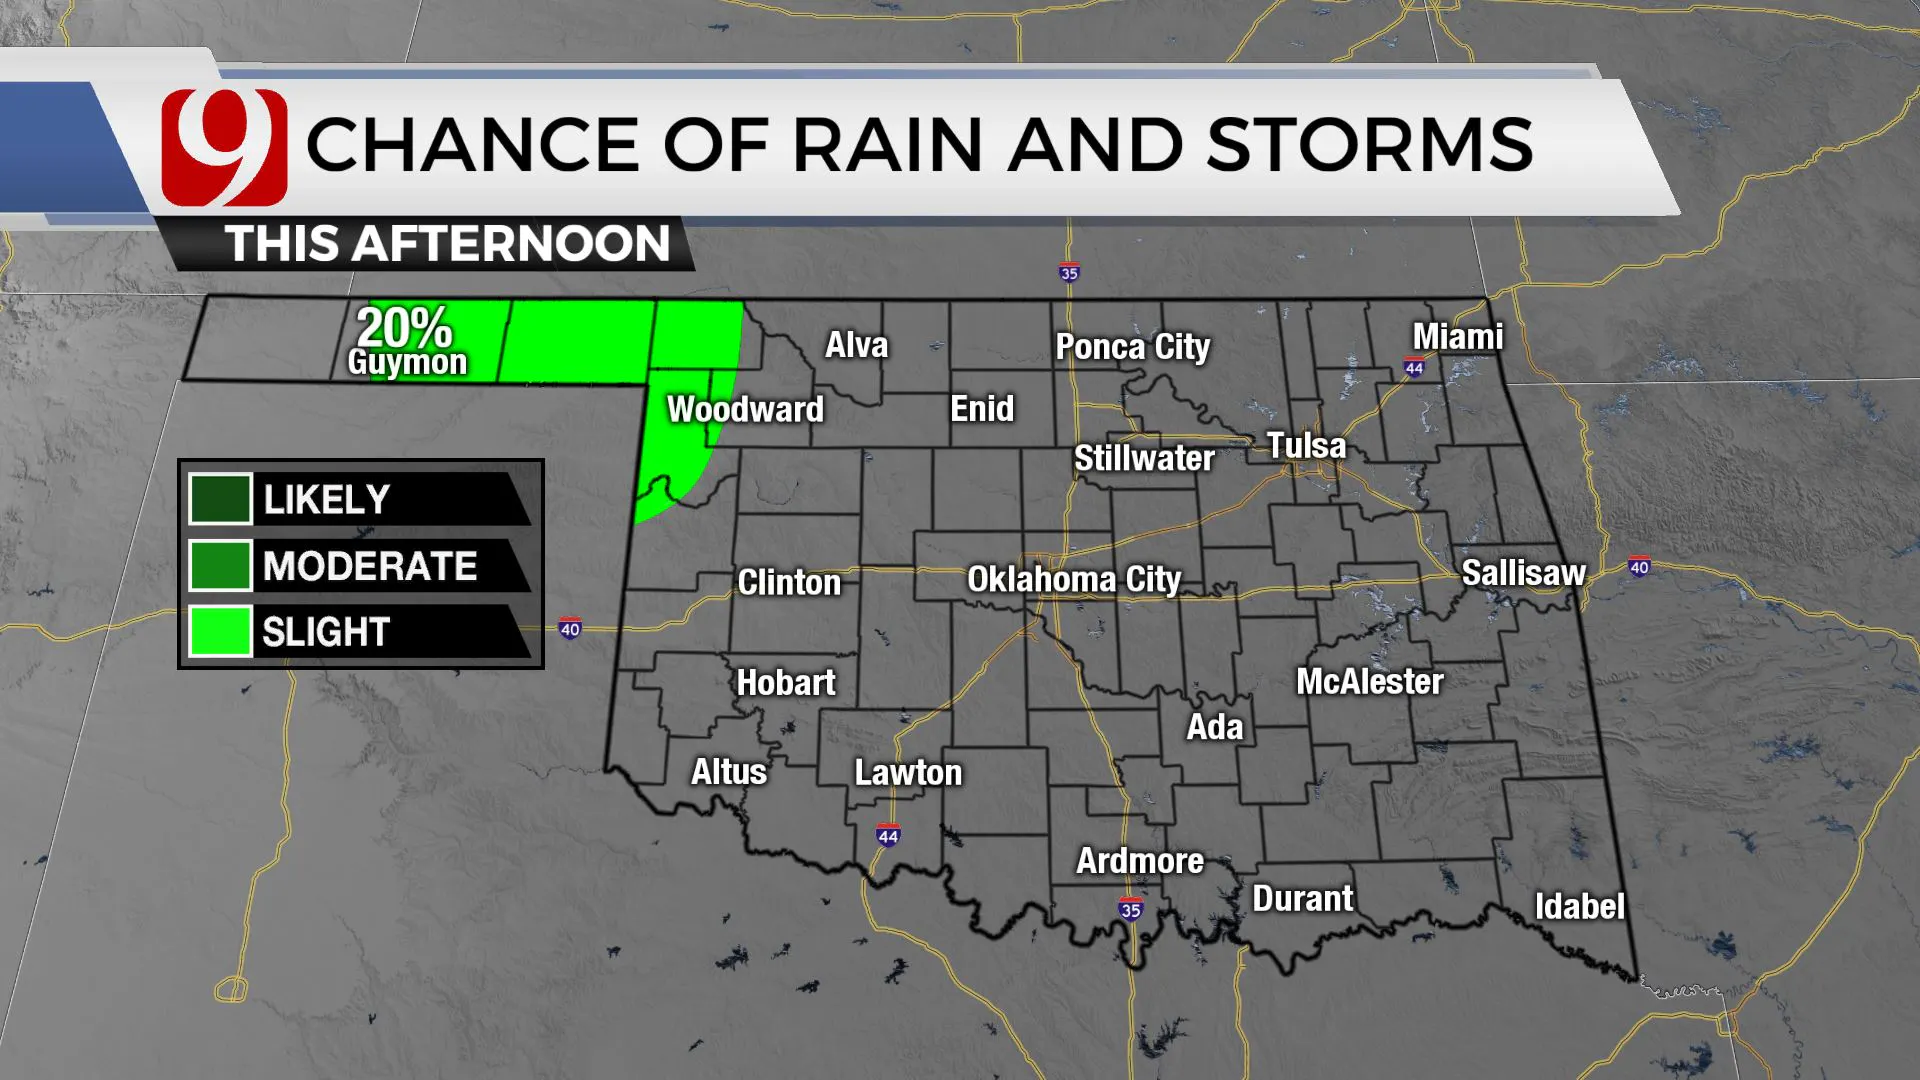 Chances of rain and storms this afternoon